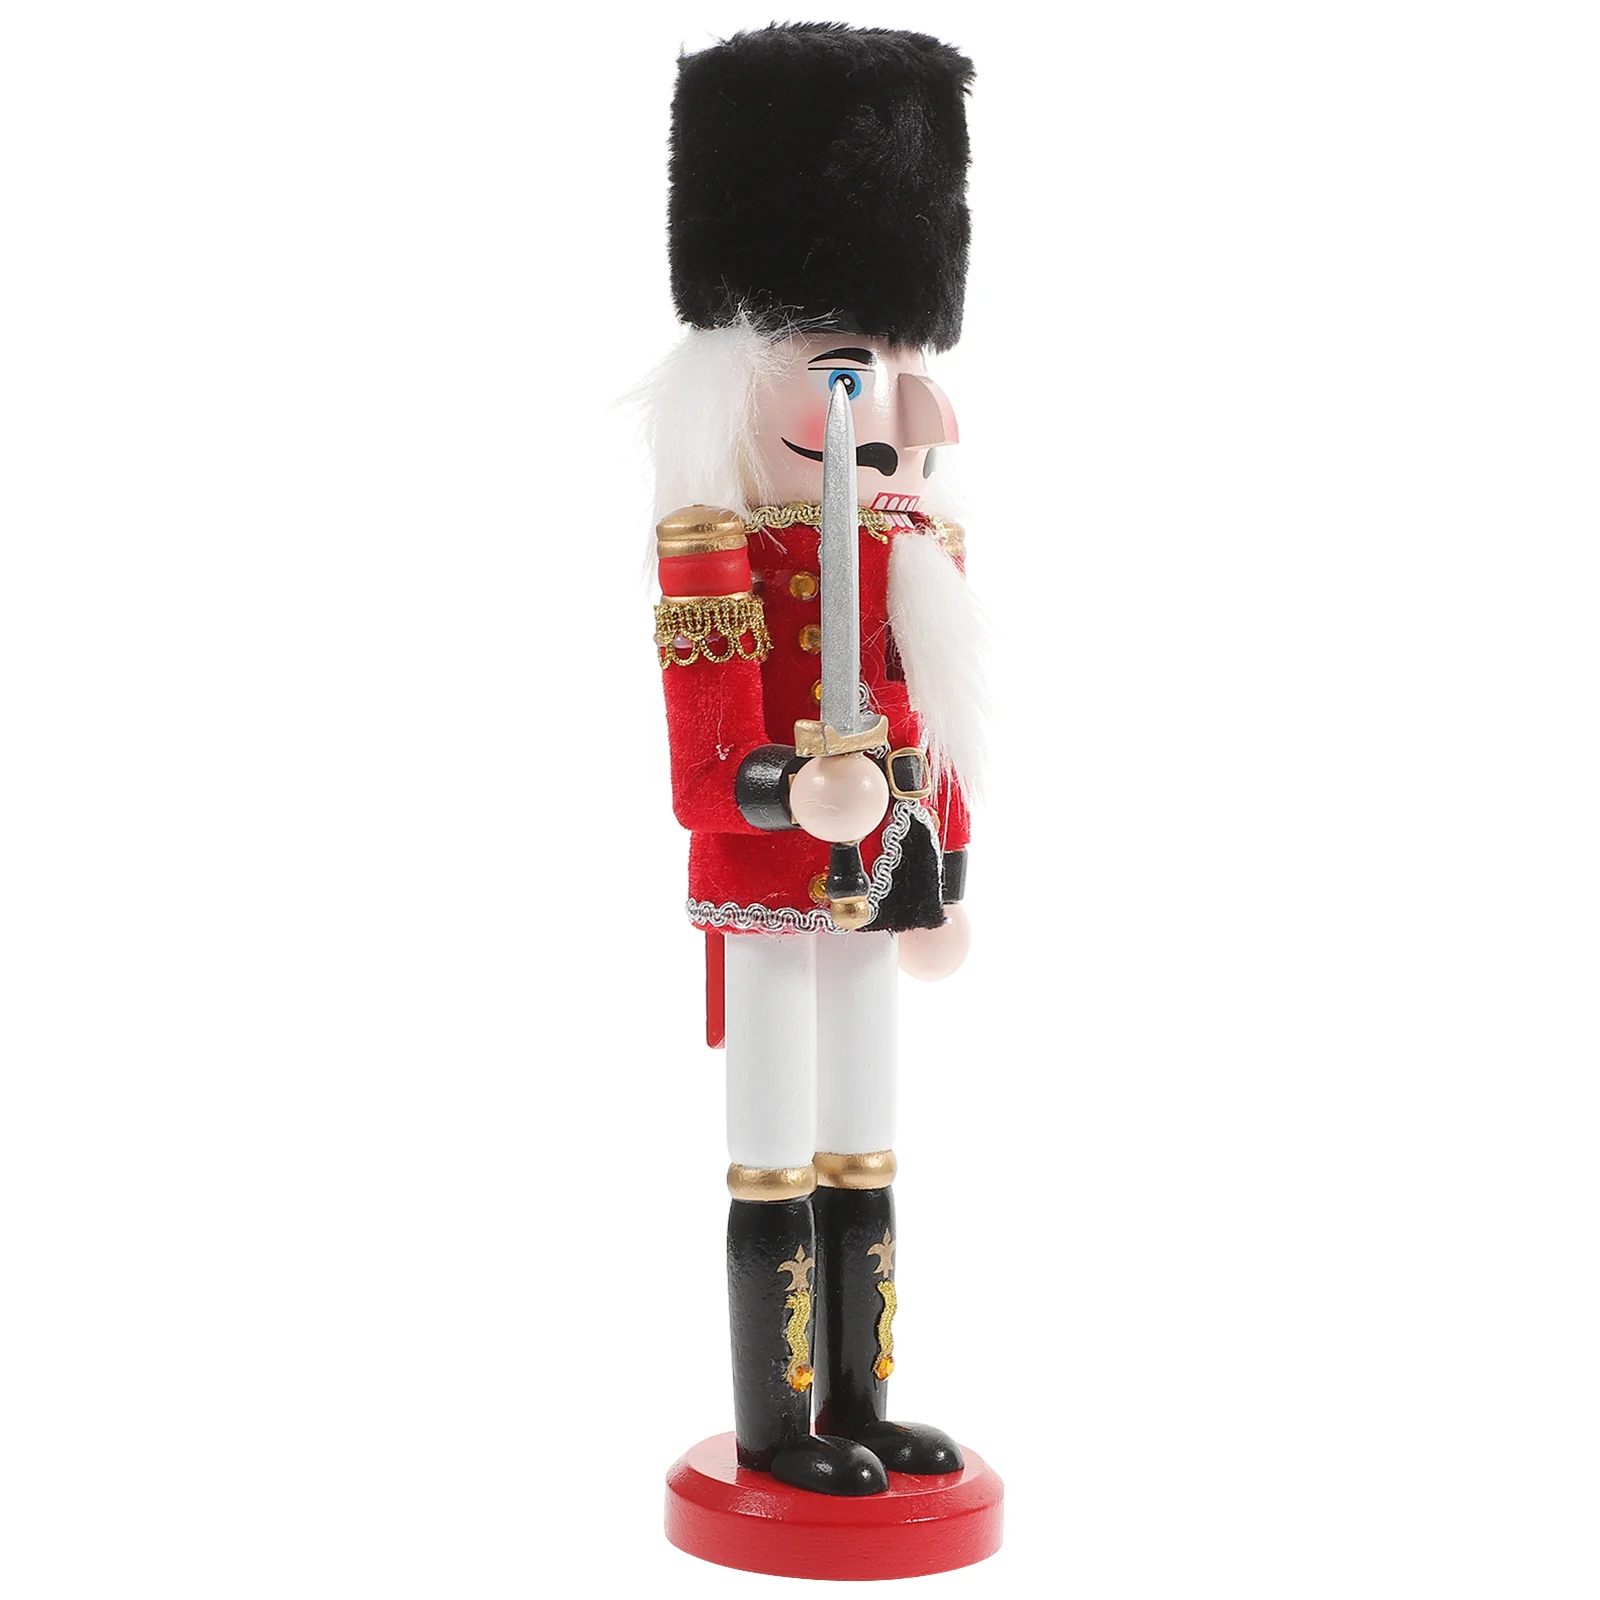 

Nutcracker Wooden Decor Decorations Christmas Figurines Gifts Centerpieces Table Soldier Soldiers Tree Easter Nutcrackers